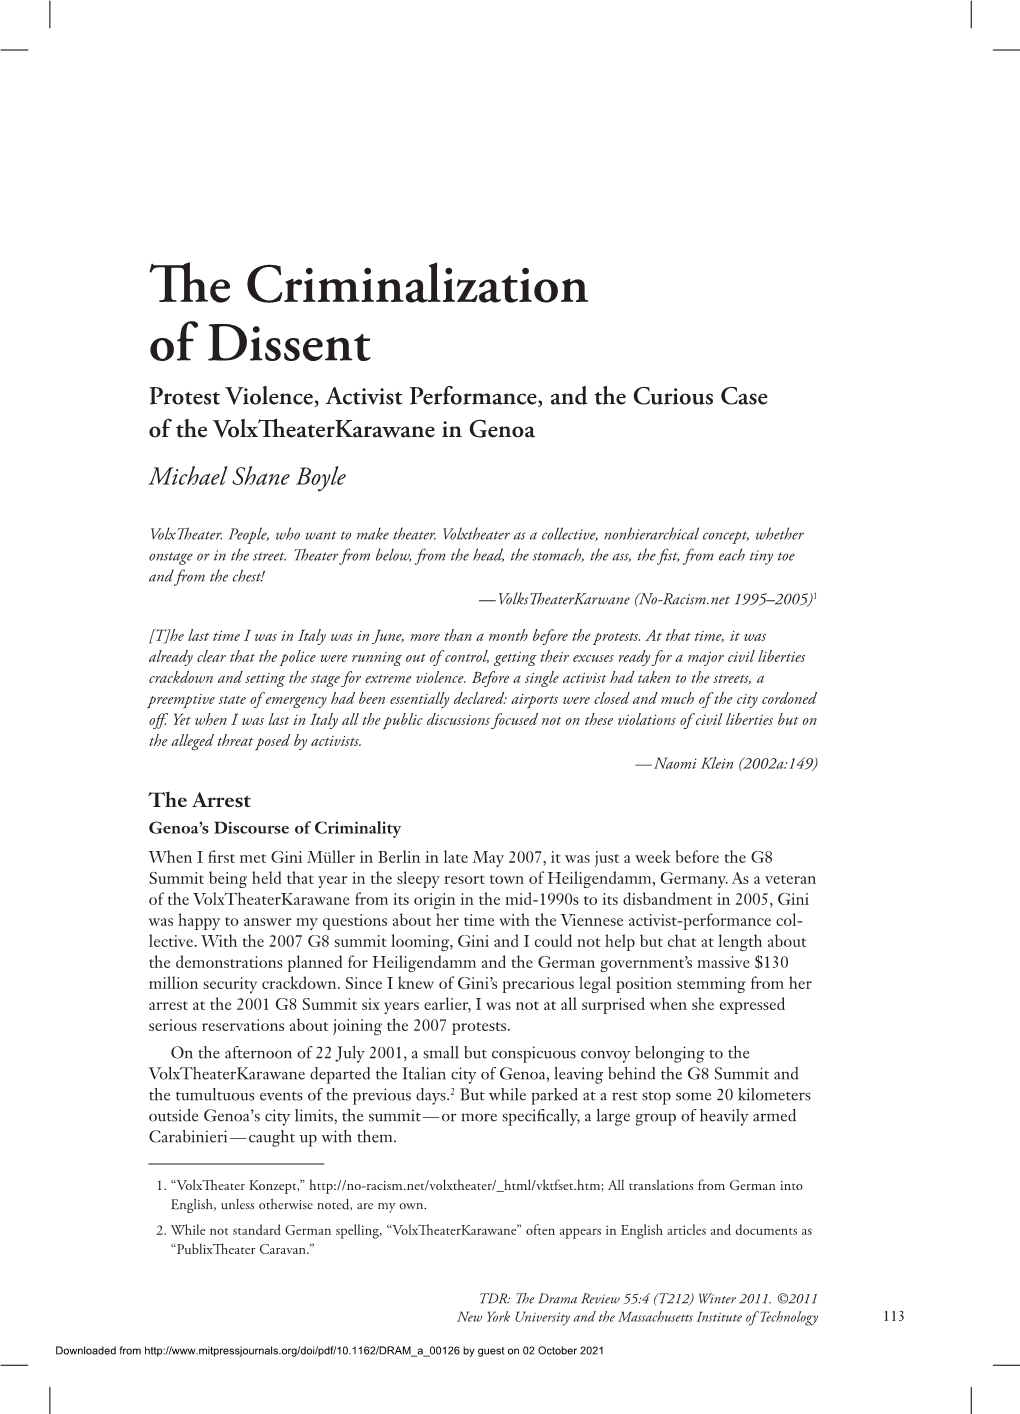 The Criminalization of Dissent Protest Violence, Activist Performance, and the Curious Case of the Volxtheaterkarawane in Genoa Michael Shane Boyle